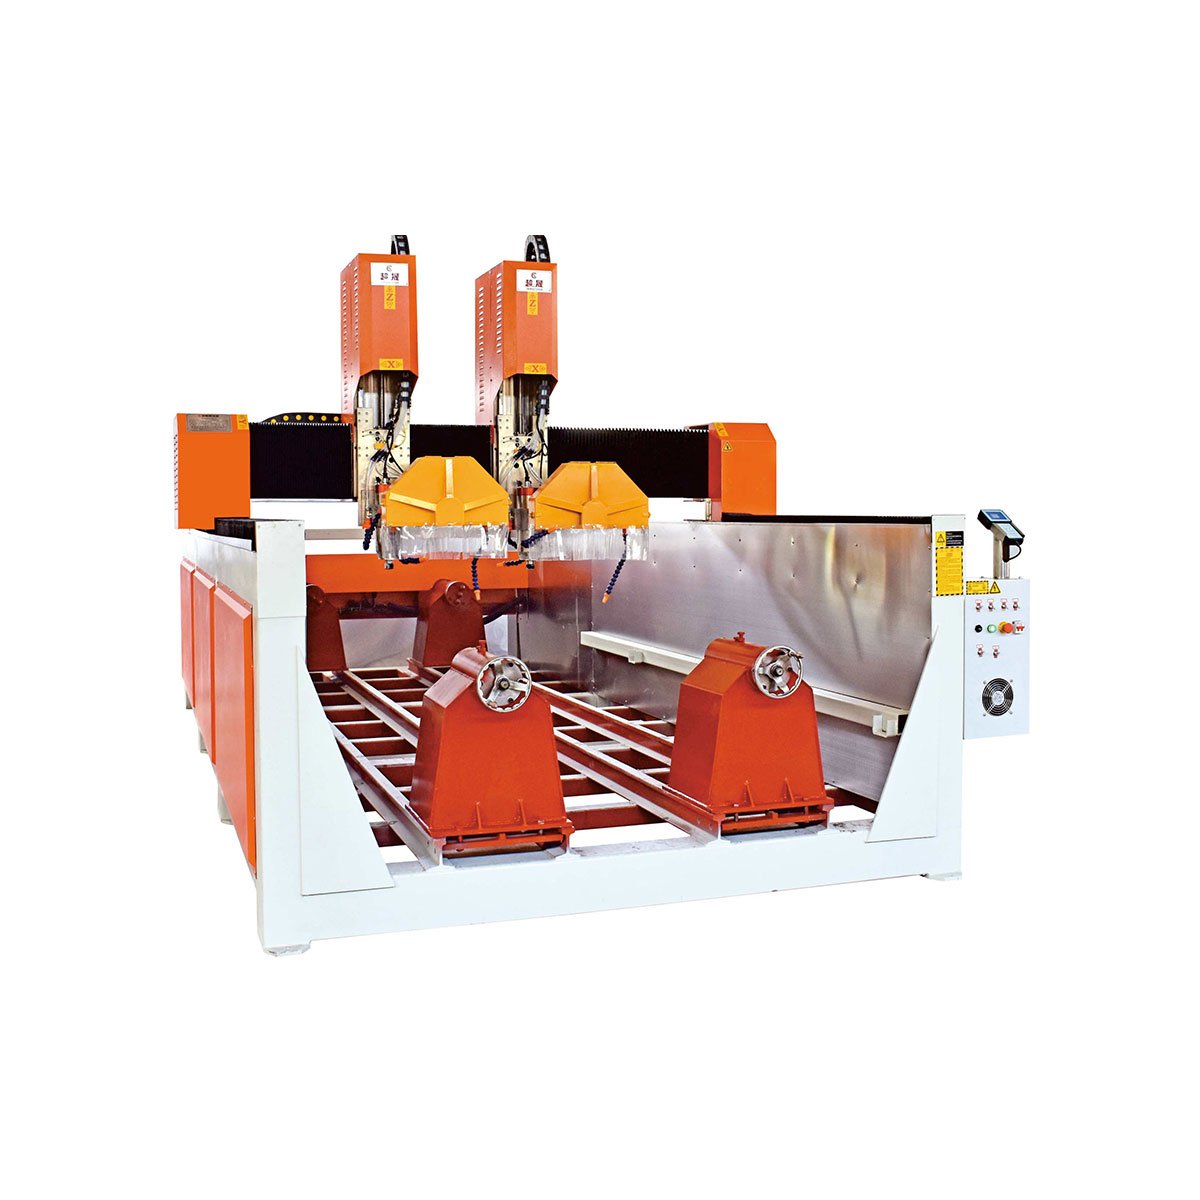 4 axis Double Head Stone Multi-function Engraving Machine